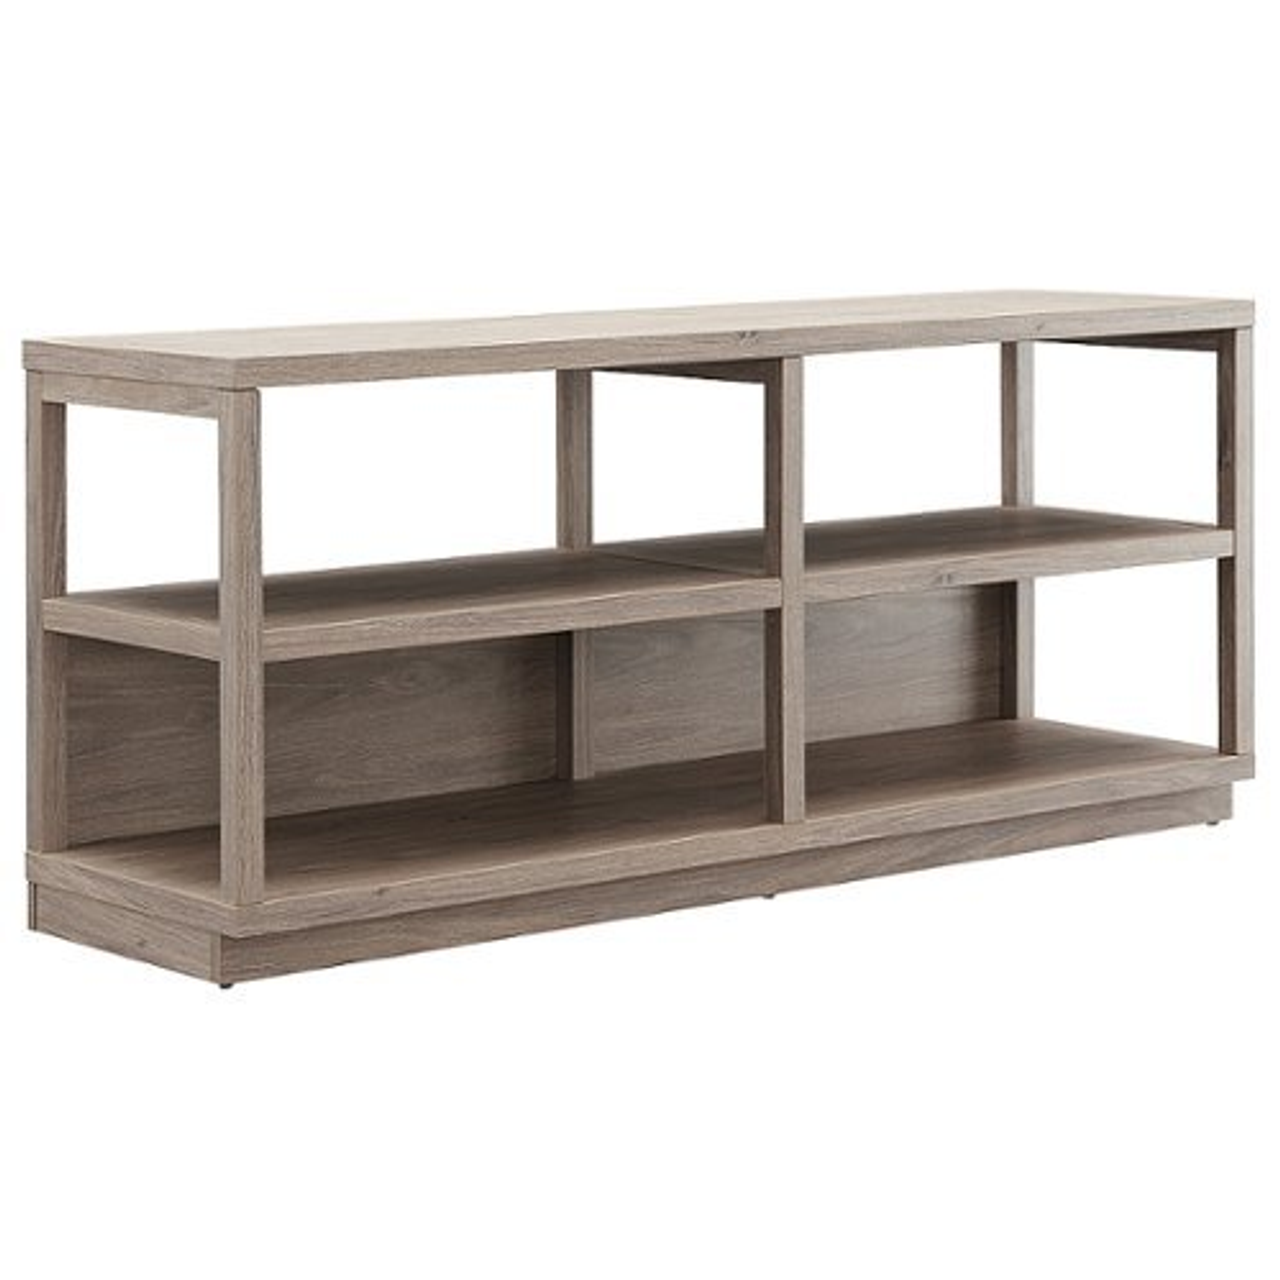 Camden&Wells - Thalia TV Stand for TVs up to 60" - Antiqued Gray Oak